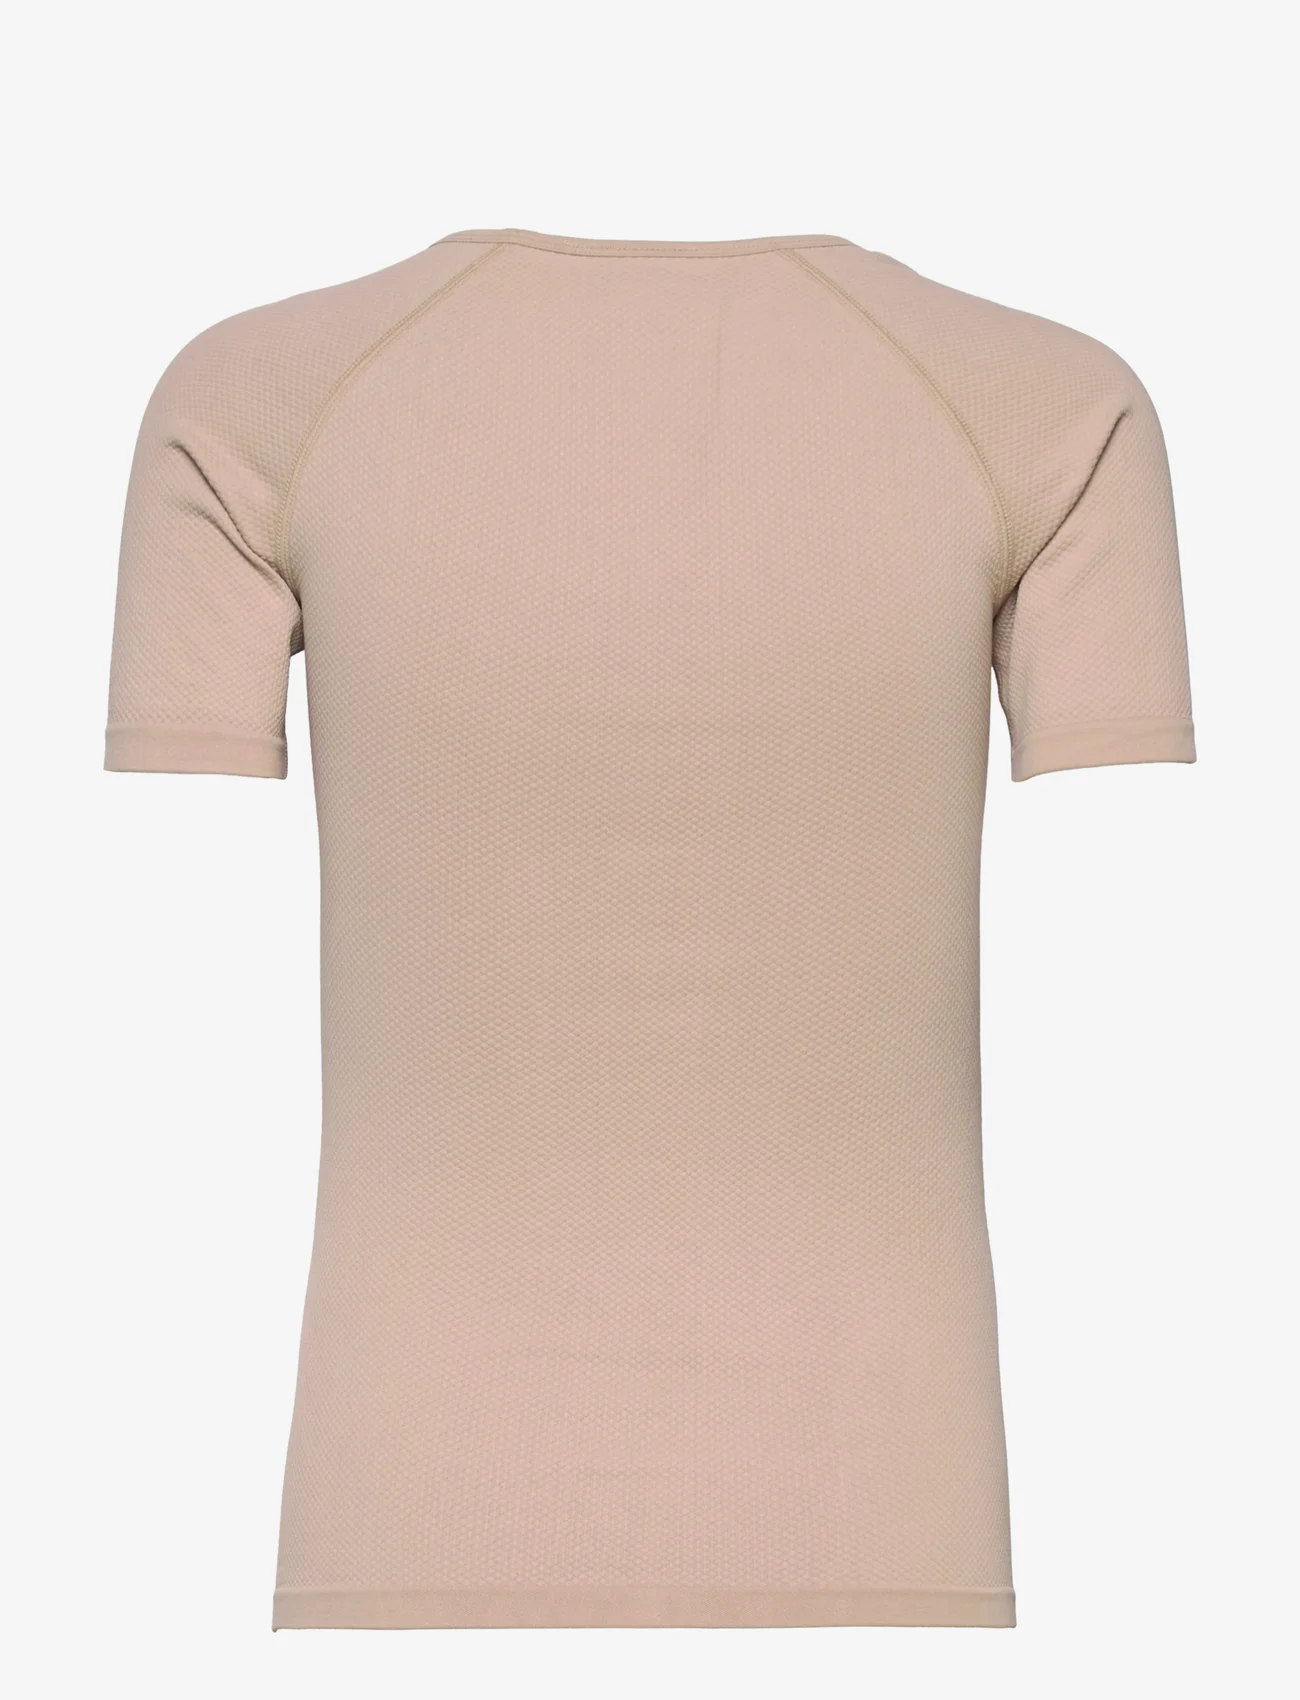 AIM'N - Luxe Seamless Short Sleeve - t-shirts - solid beige - 1